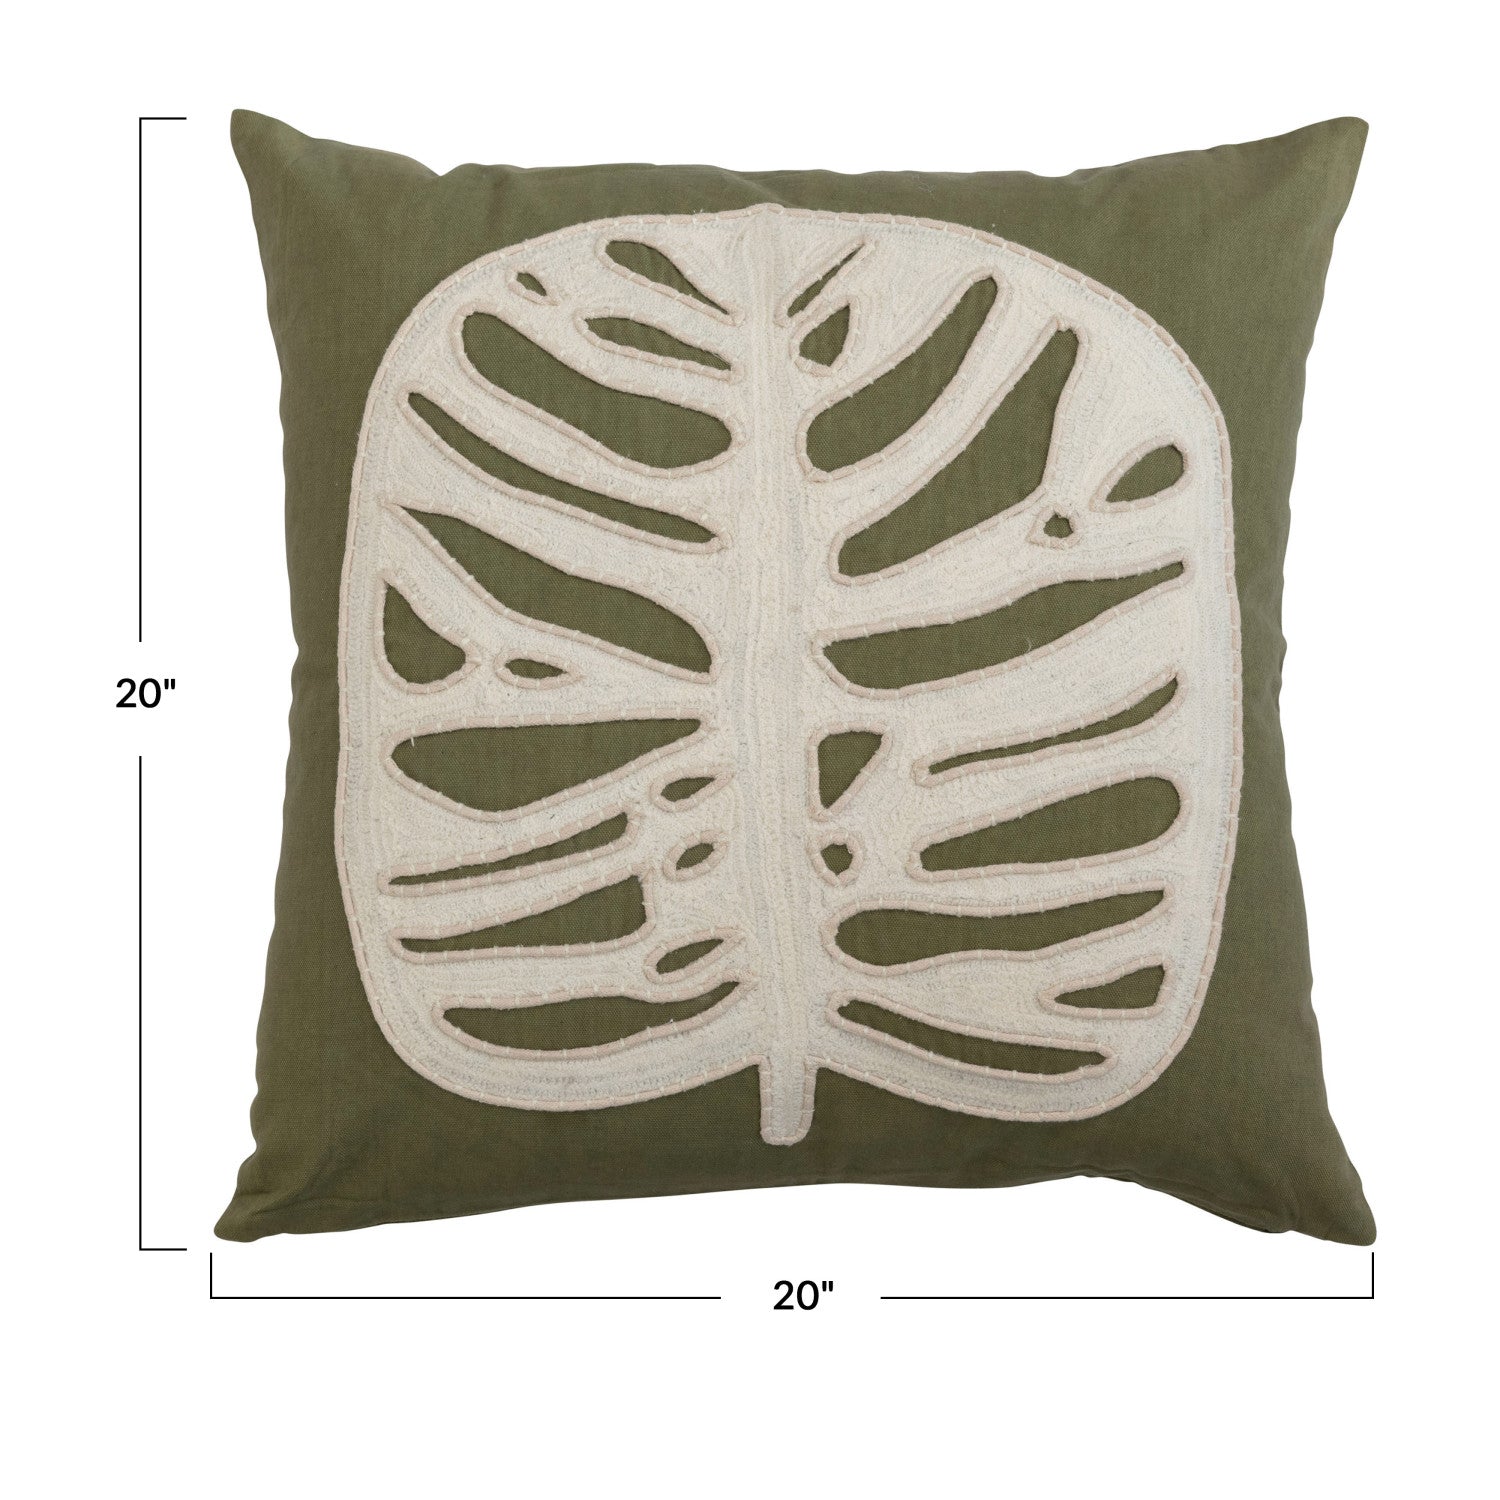 20 inch square cotton pillow in green with cream coloured applique leaf.